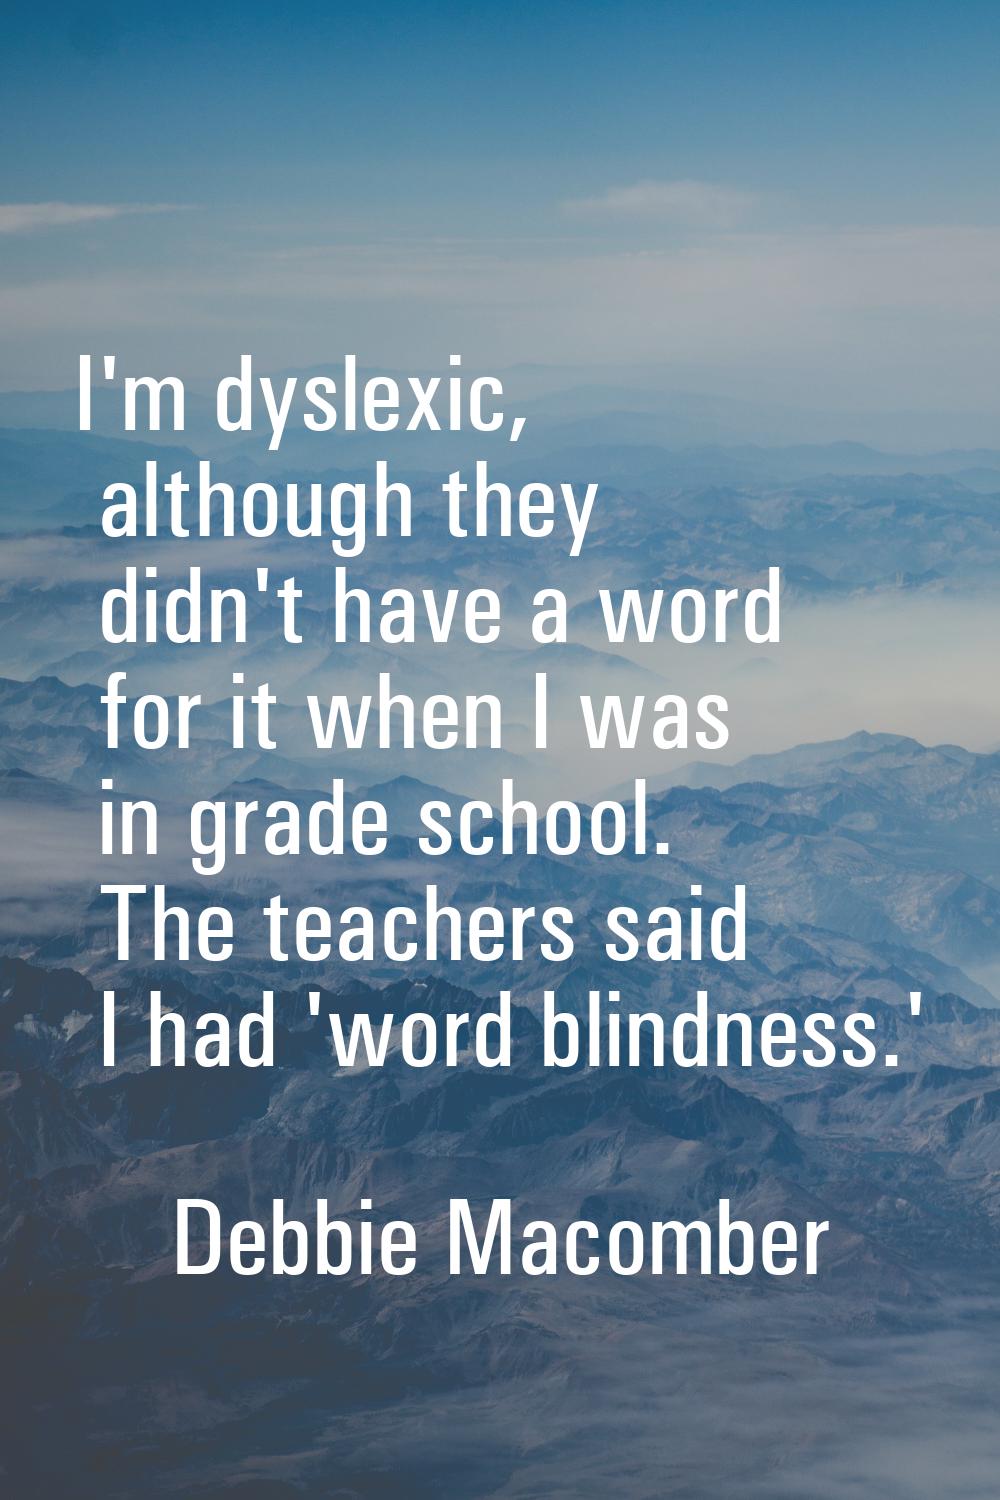 I'm dyslexic, although they didn't have a word for it when I was in grade school. The teachers said